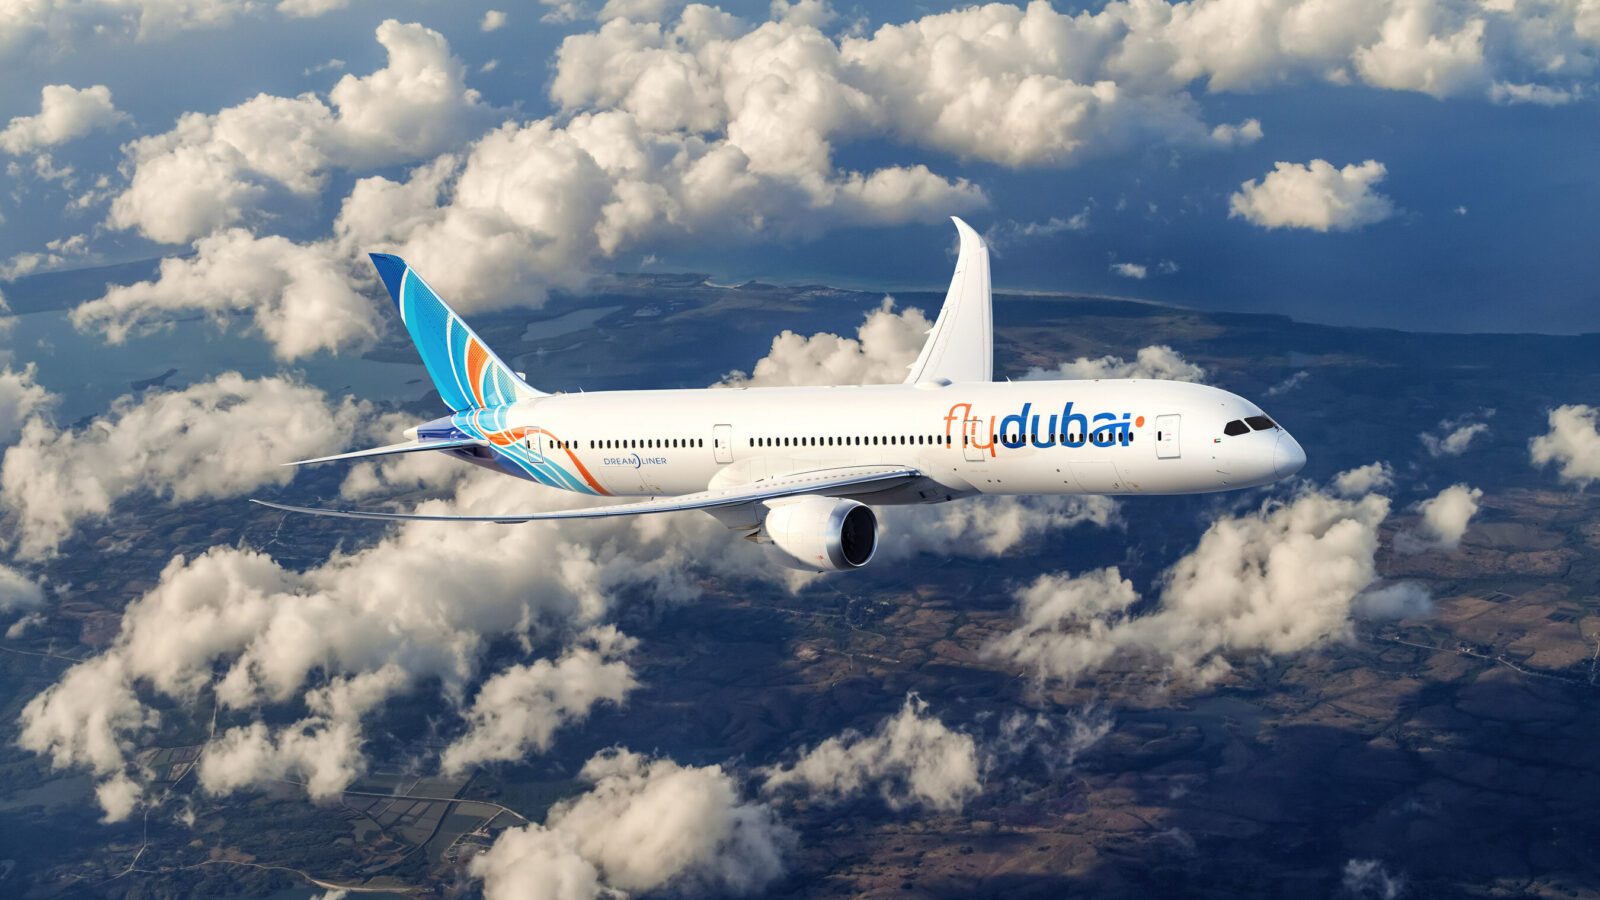 Boeing and flydubai announced today an agreement to purchase 30 787-9 Dreamliners